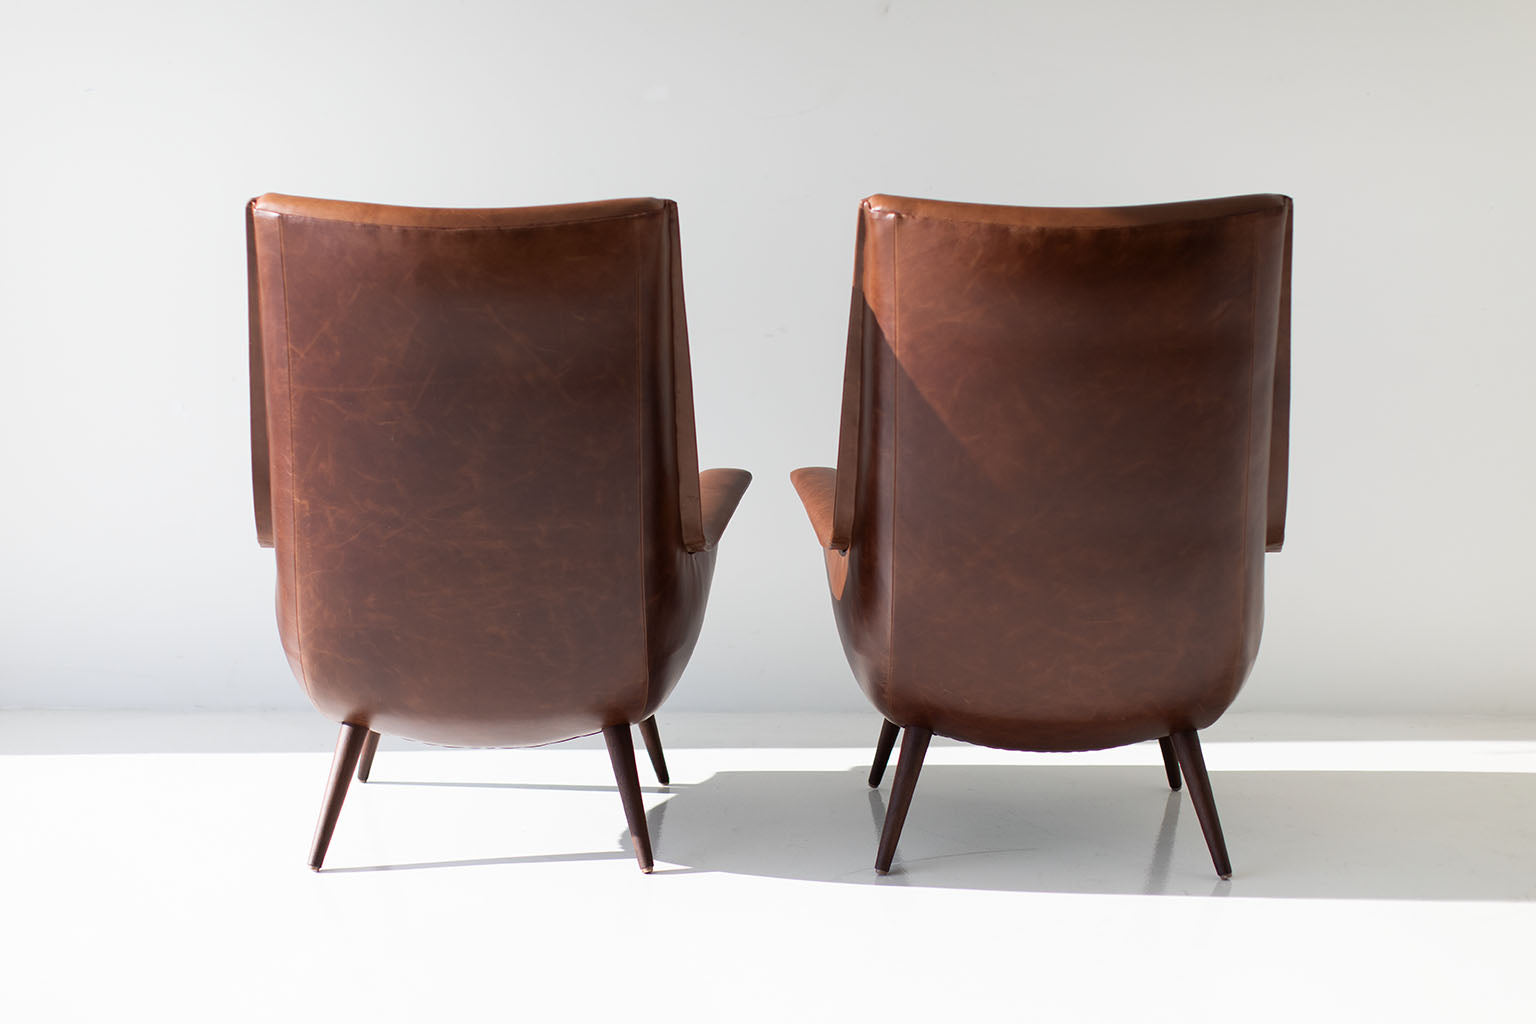 Modern Chairs | Lawrence Peabody Chair | Associates – craft Craft furniture Back High associates®